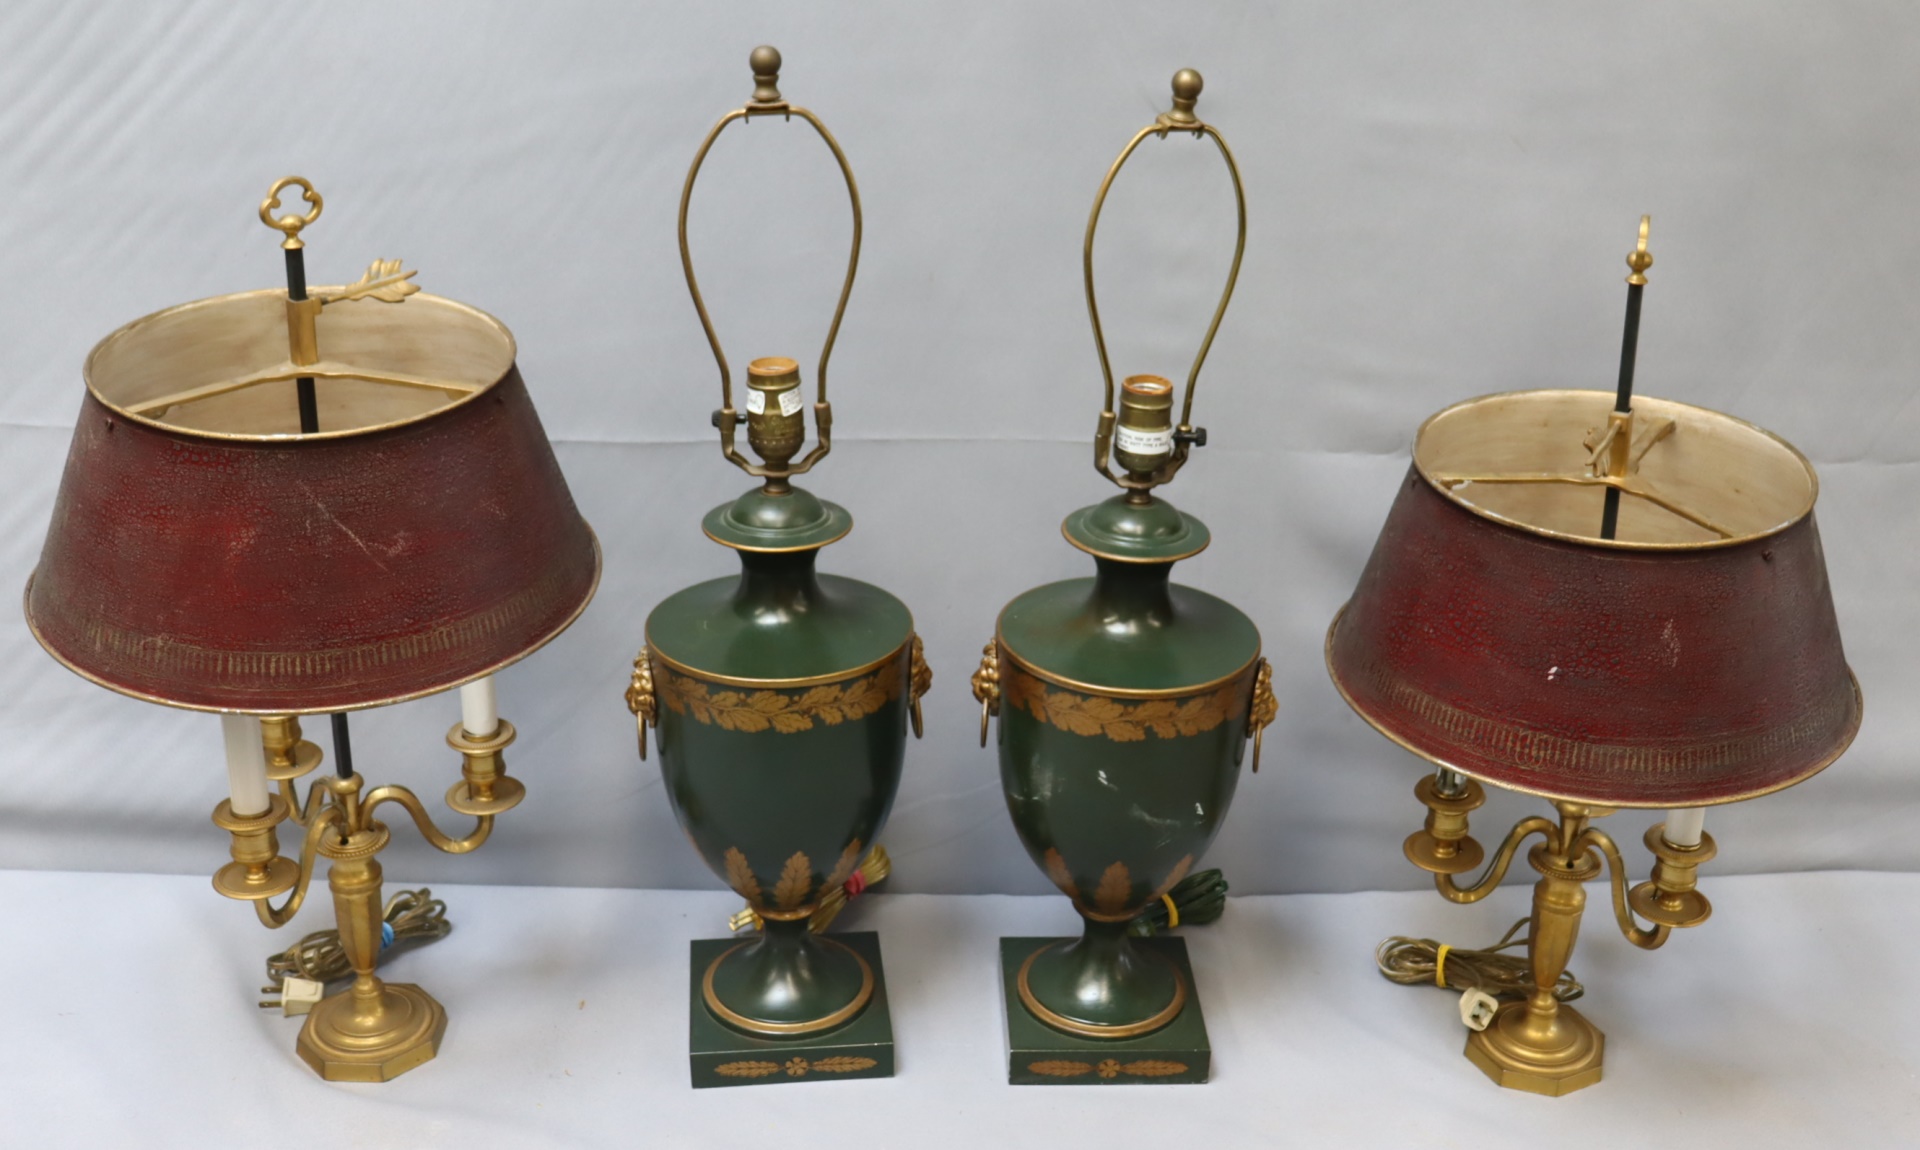 2 PAIRS OF VINTAGE TABLE LAMPS